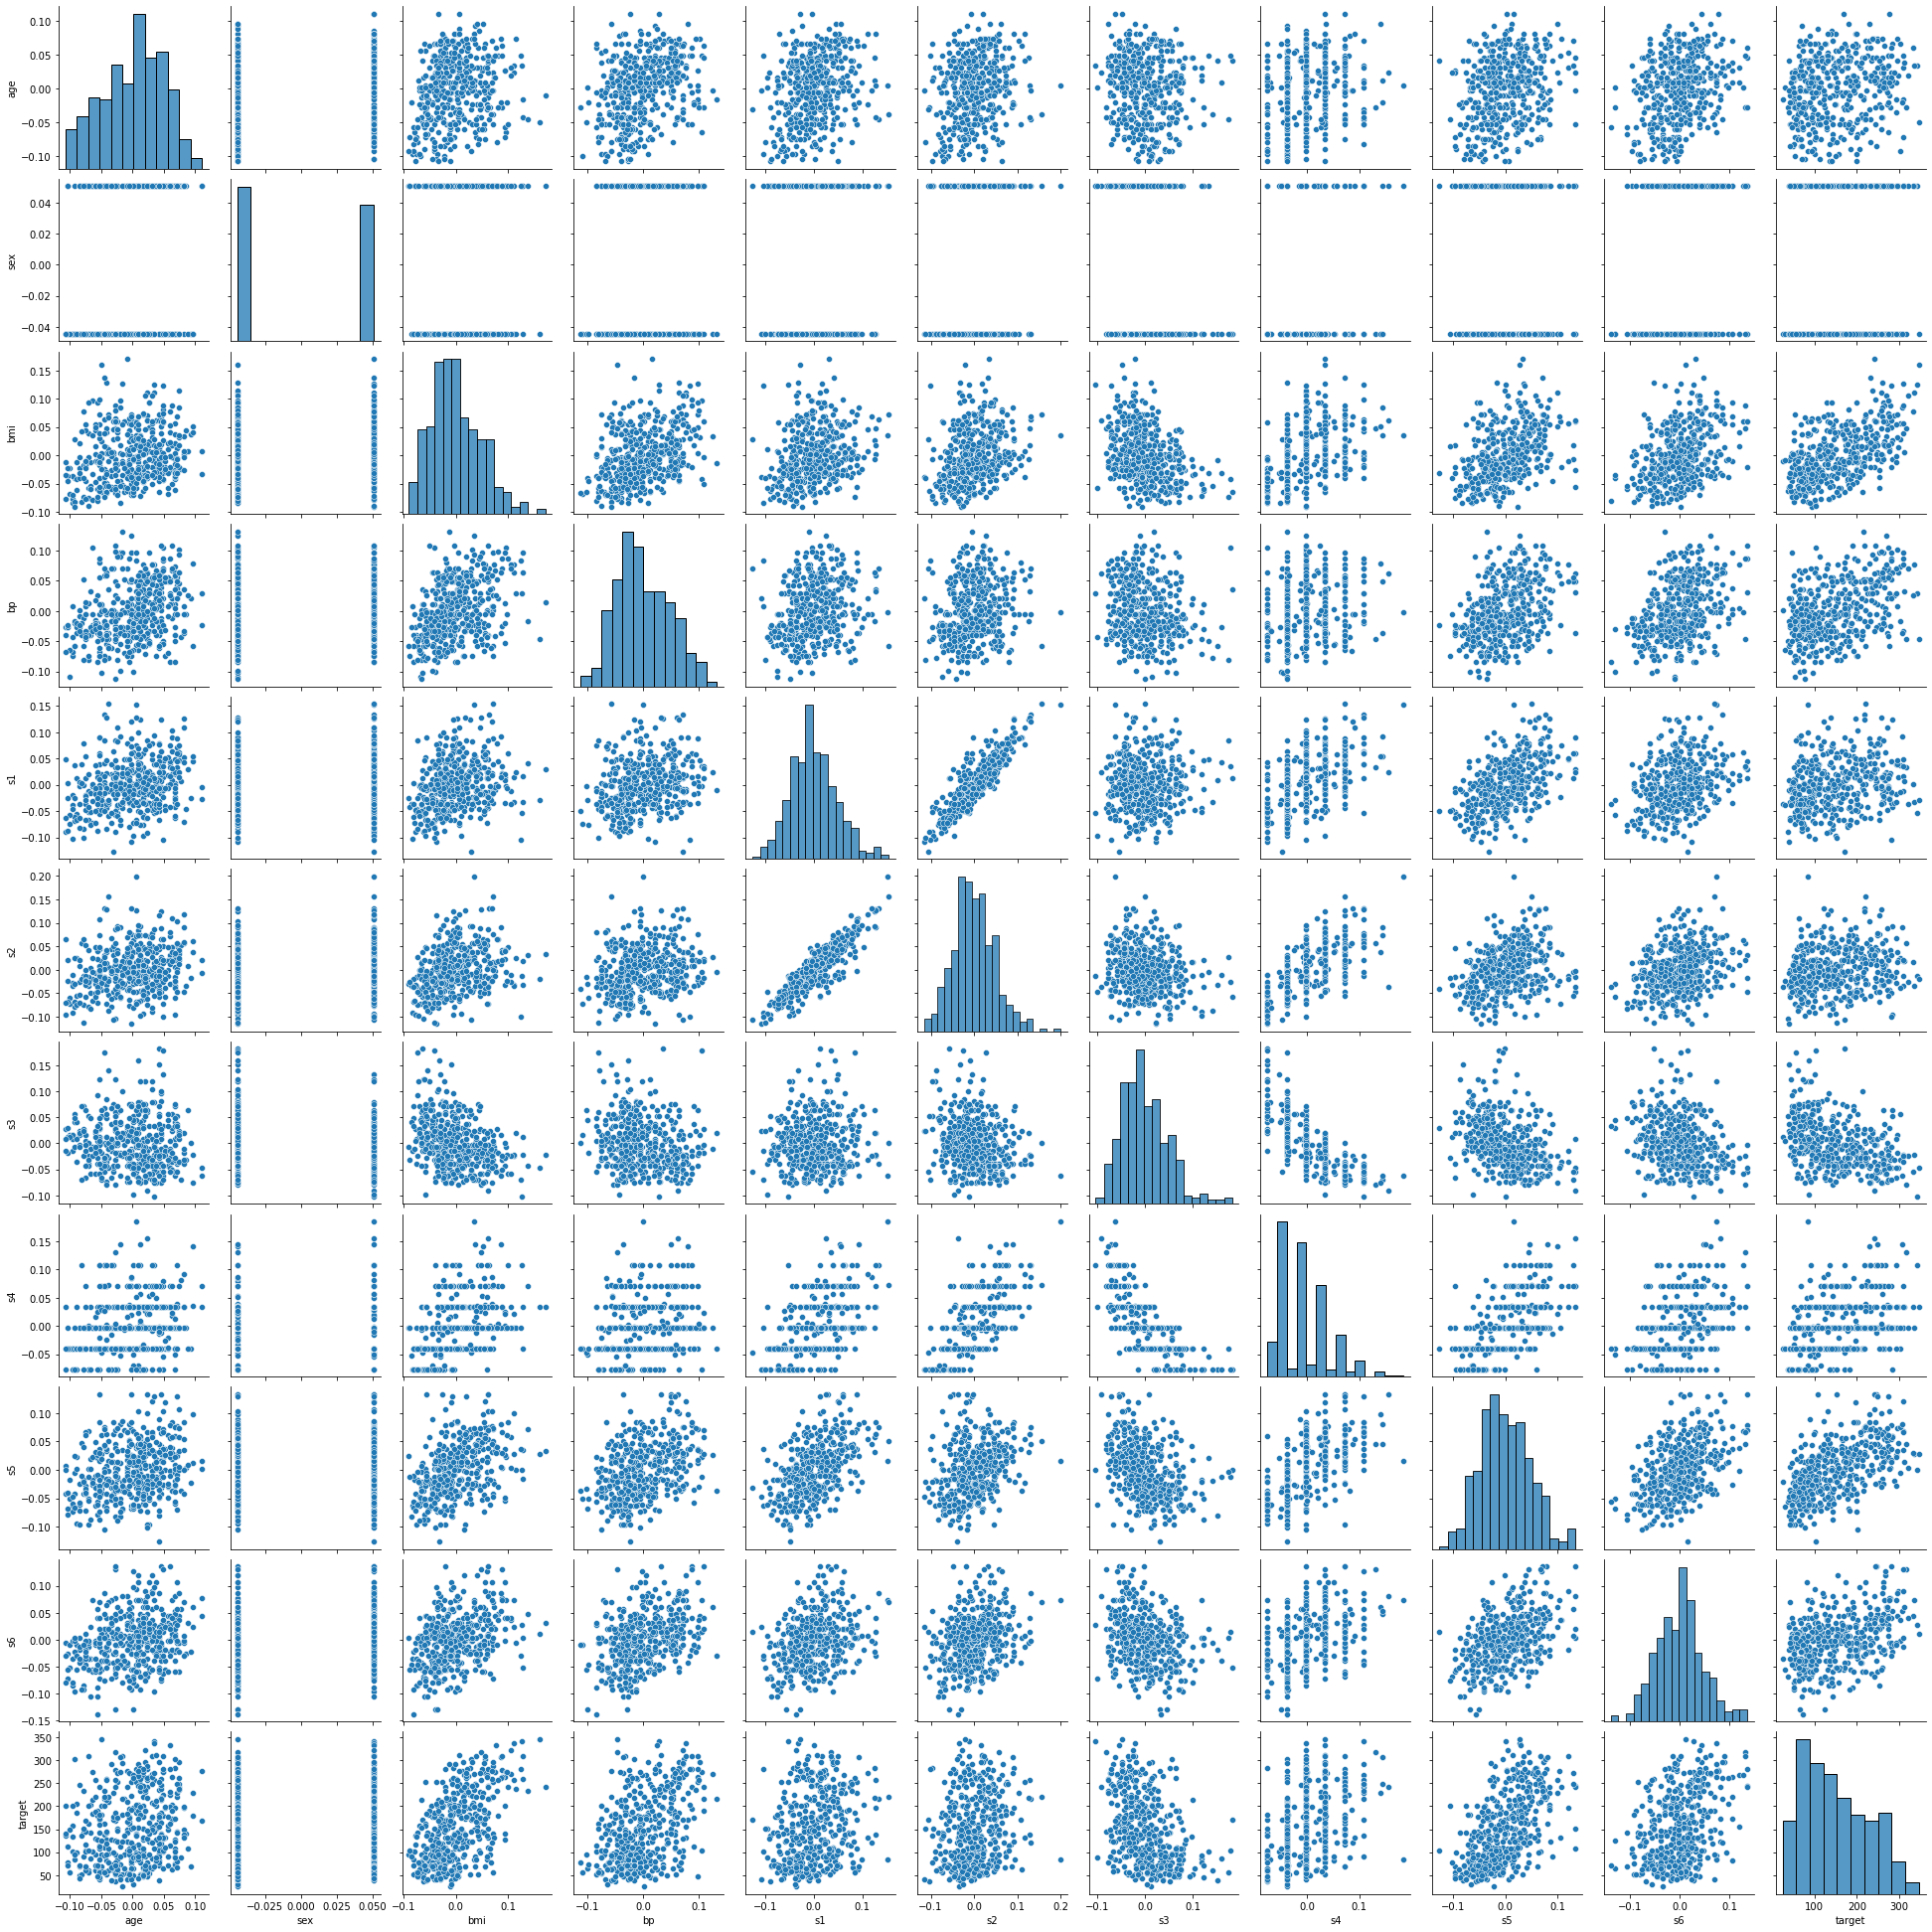 ../_images/examples_scatter_plots_5_2.png